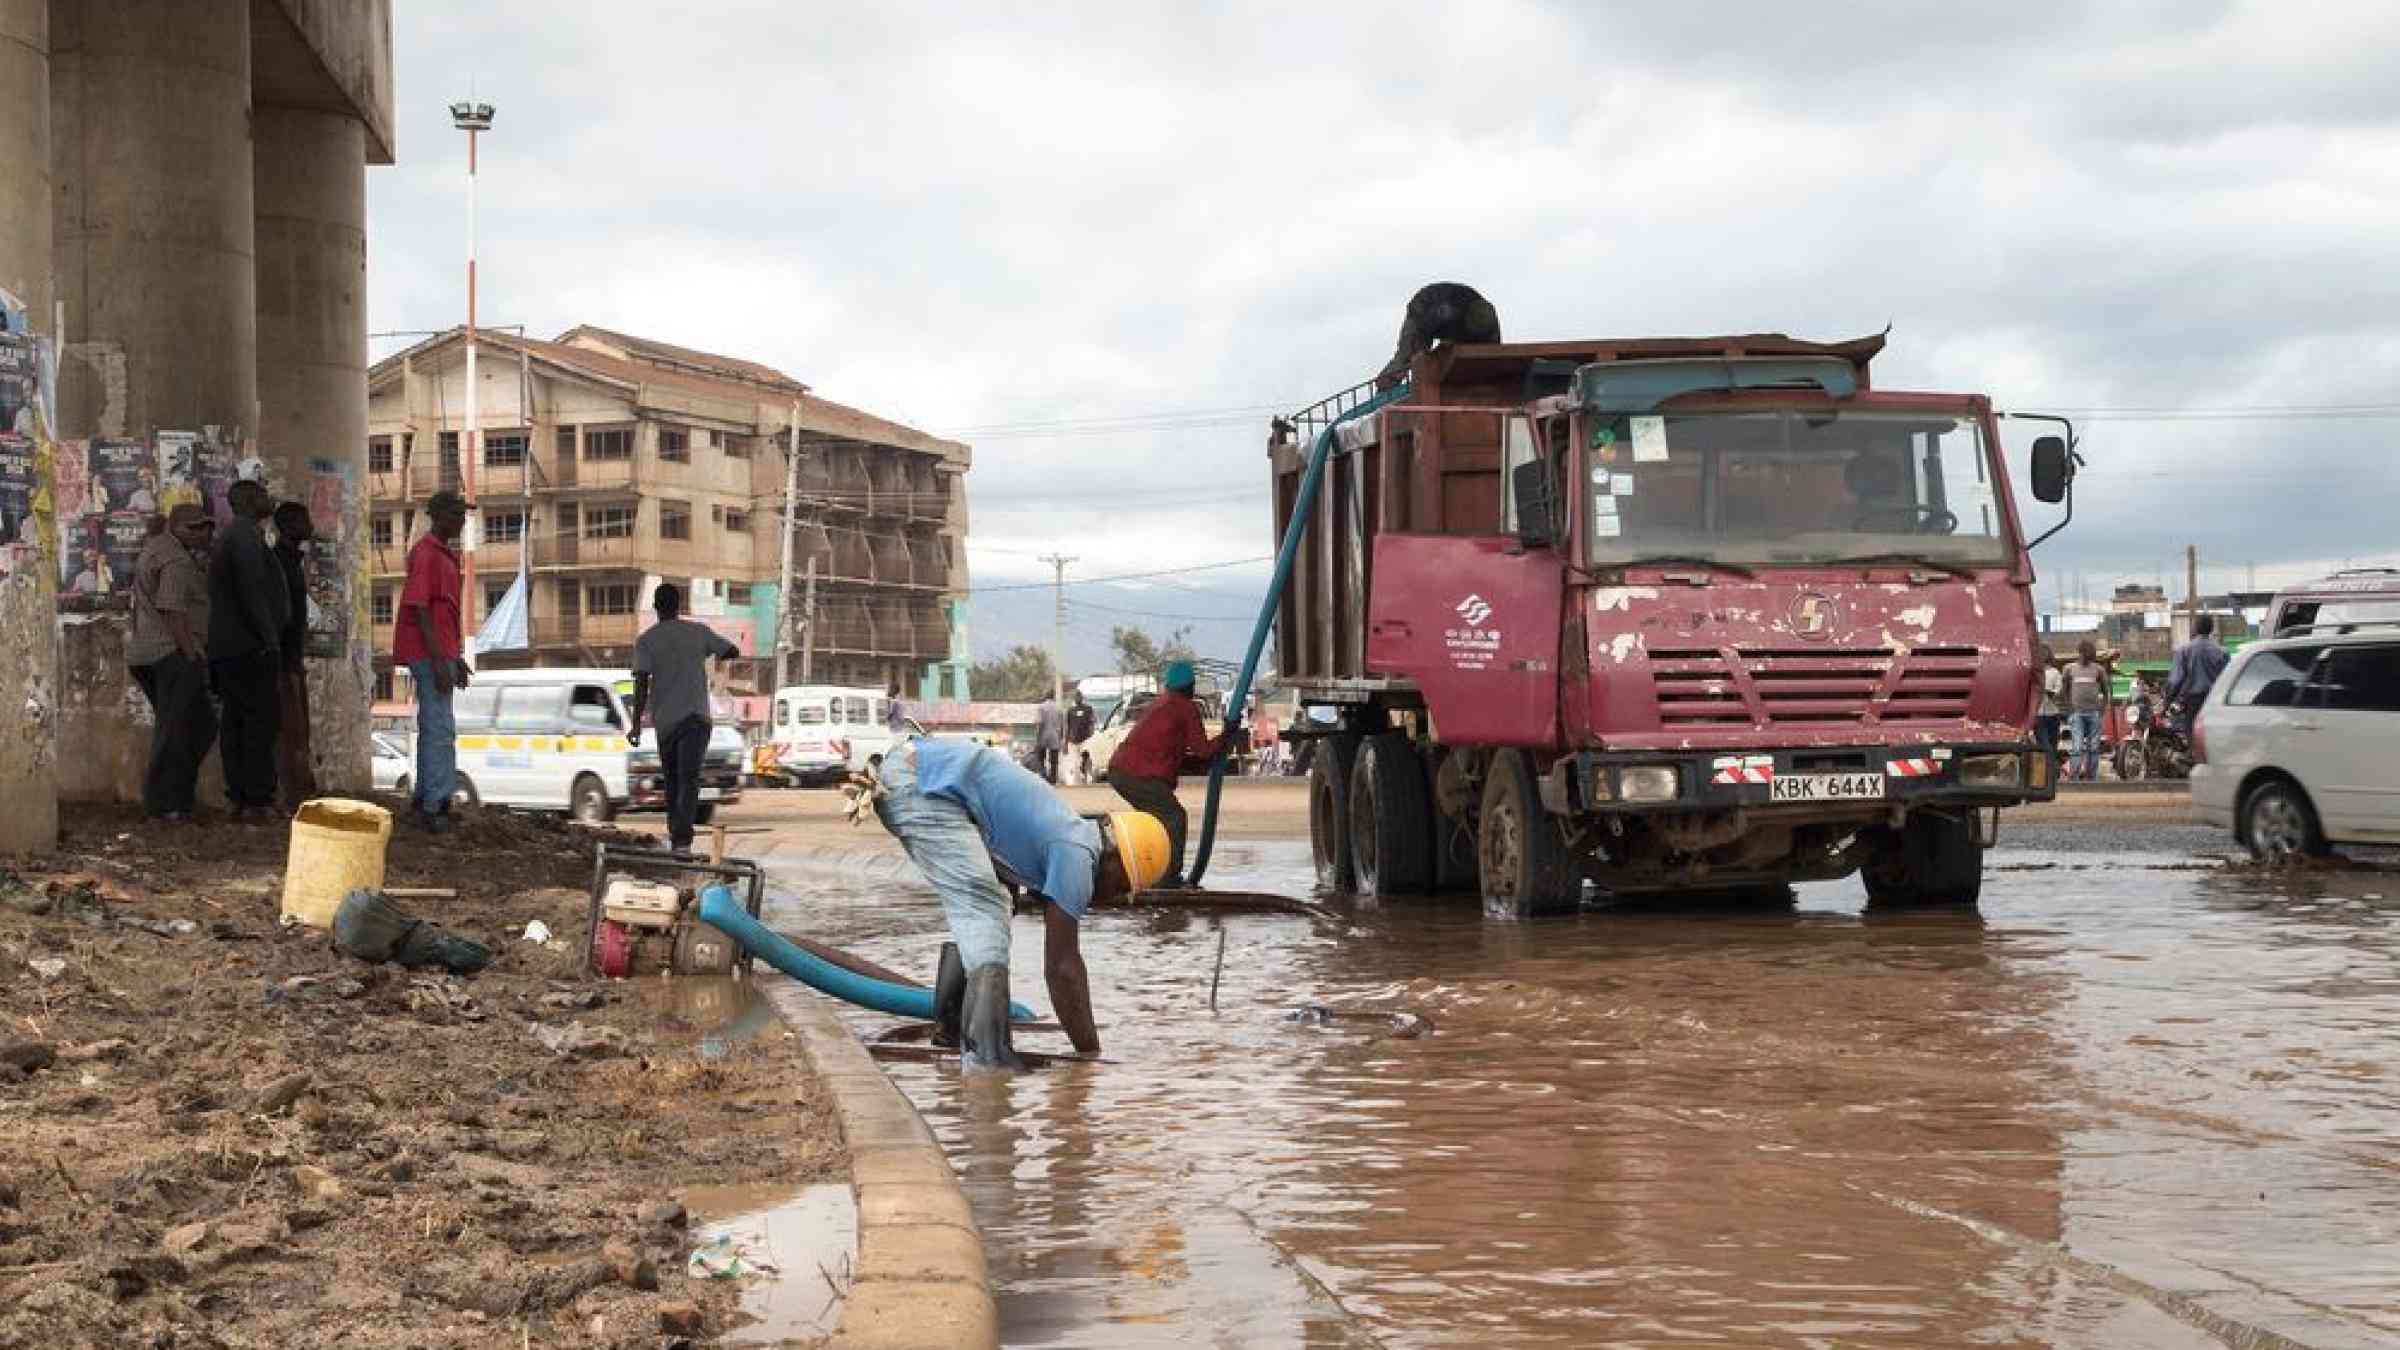 Workers drain a flooded thoroughfare after a night of severe thunderstorms in Kisumu, Kenya